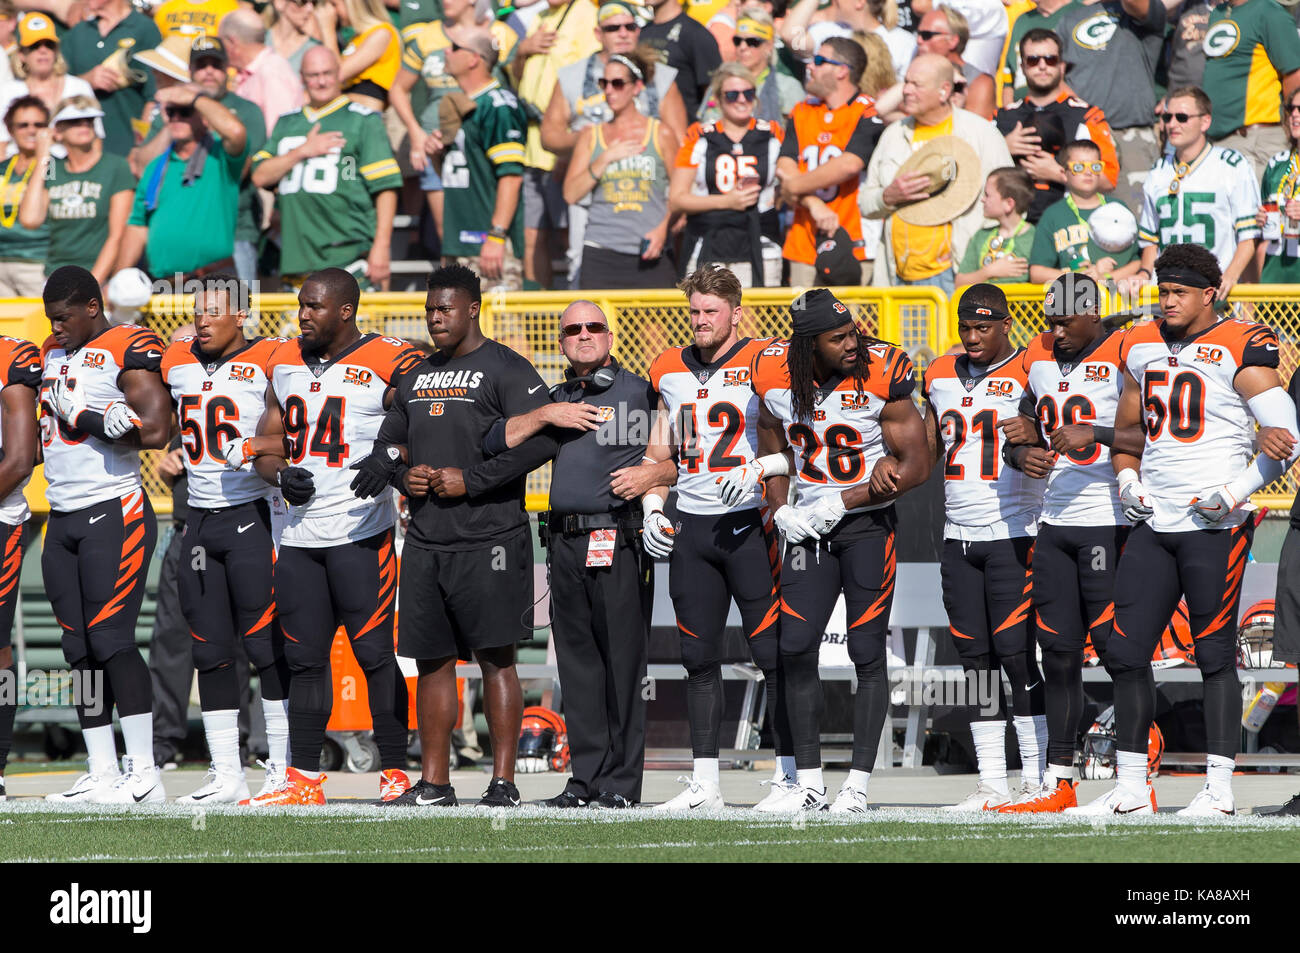 Green Bay, USA. 24th Sep, 2017. Cincinnati players lock arms during the national anthem before the NFL Football game between the Cincinnati Bengals and the Green Bay Packers at Lambeau Field in Green Bay, WI. Green Bay defeated Cincinnati in overtime 27-24. John Fisher/CSM Stock Photo